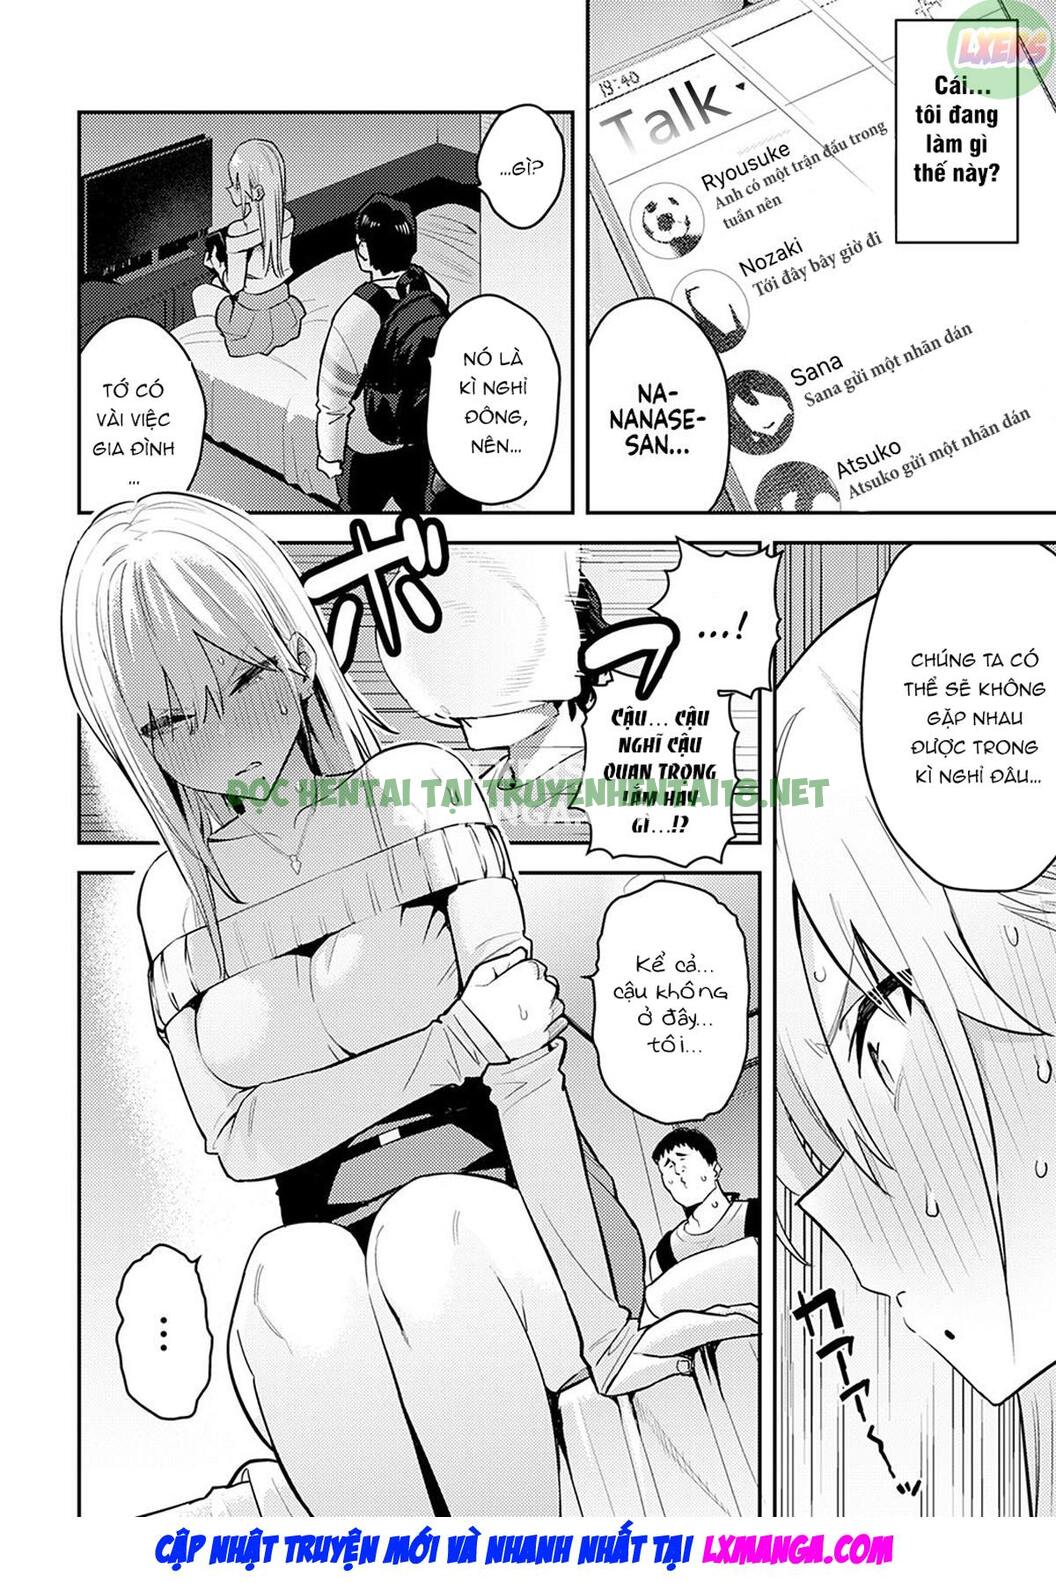 Xem ảnh The Beauty And The Beast ~The Gyaru And The Disgusting Otaku - Chapter 2 END - 9 - Hentai24h.Tv